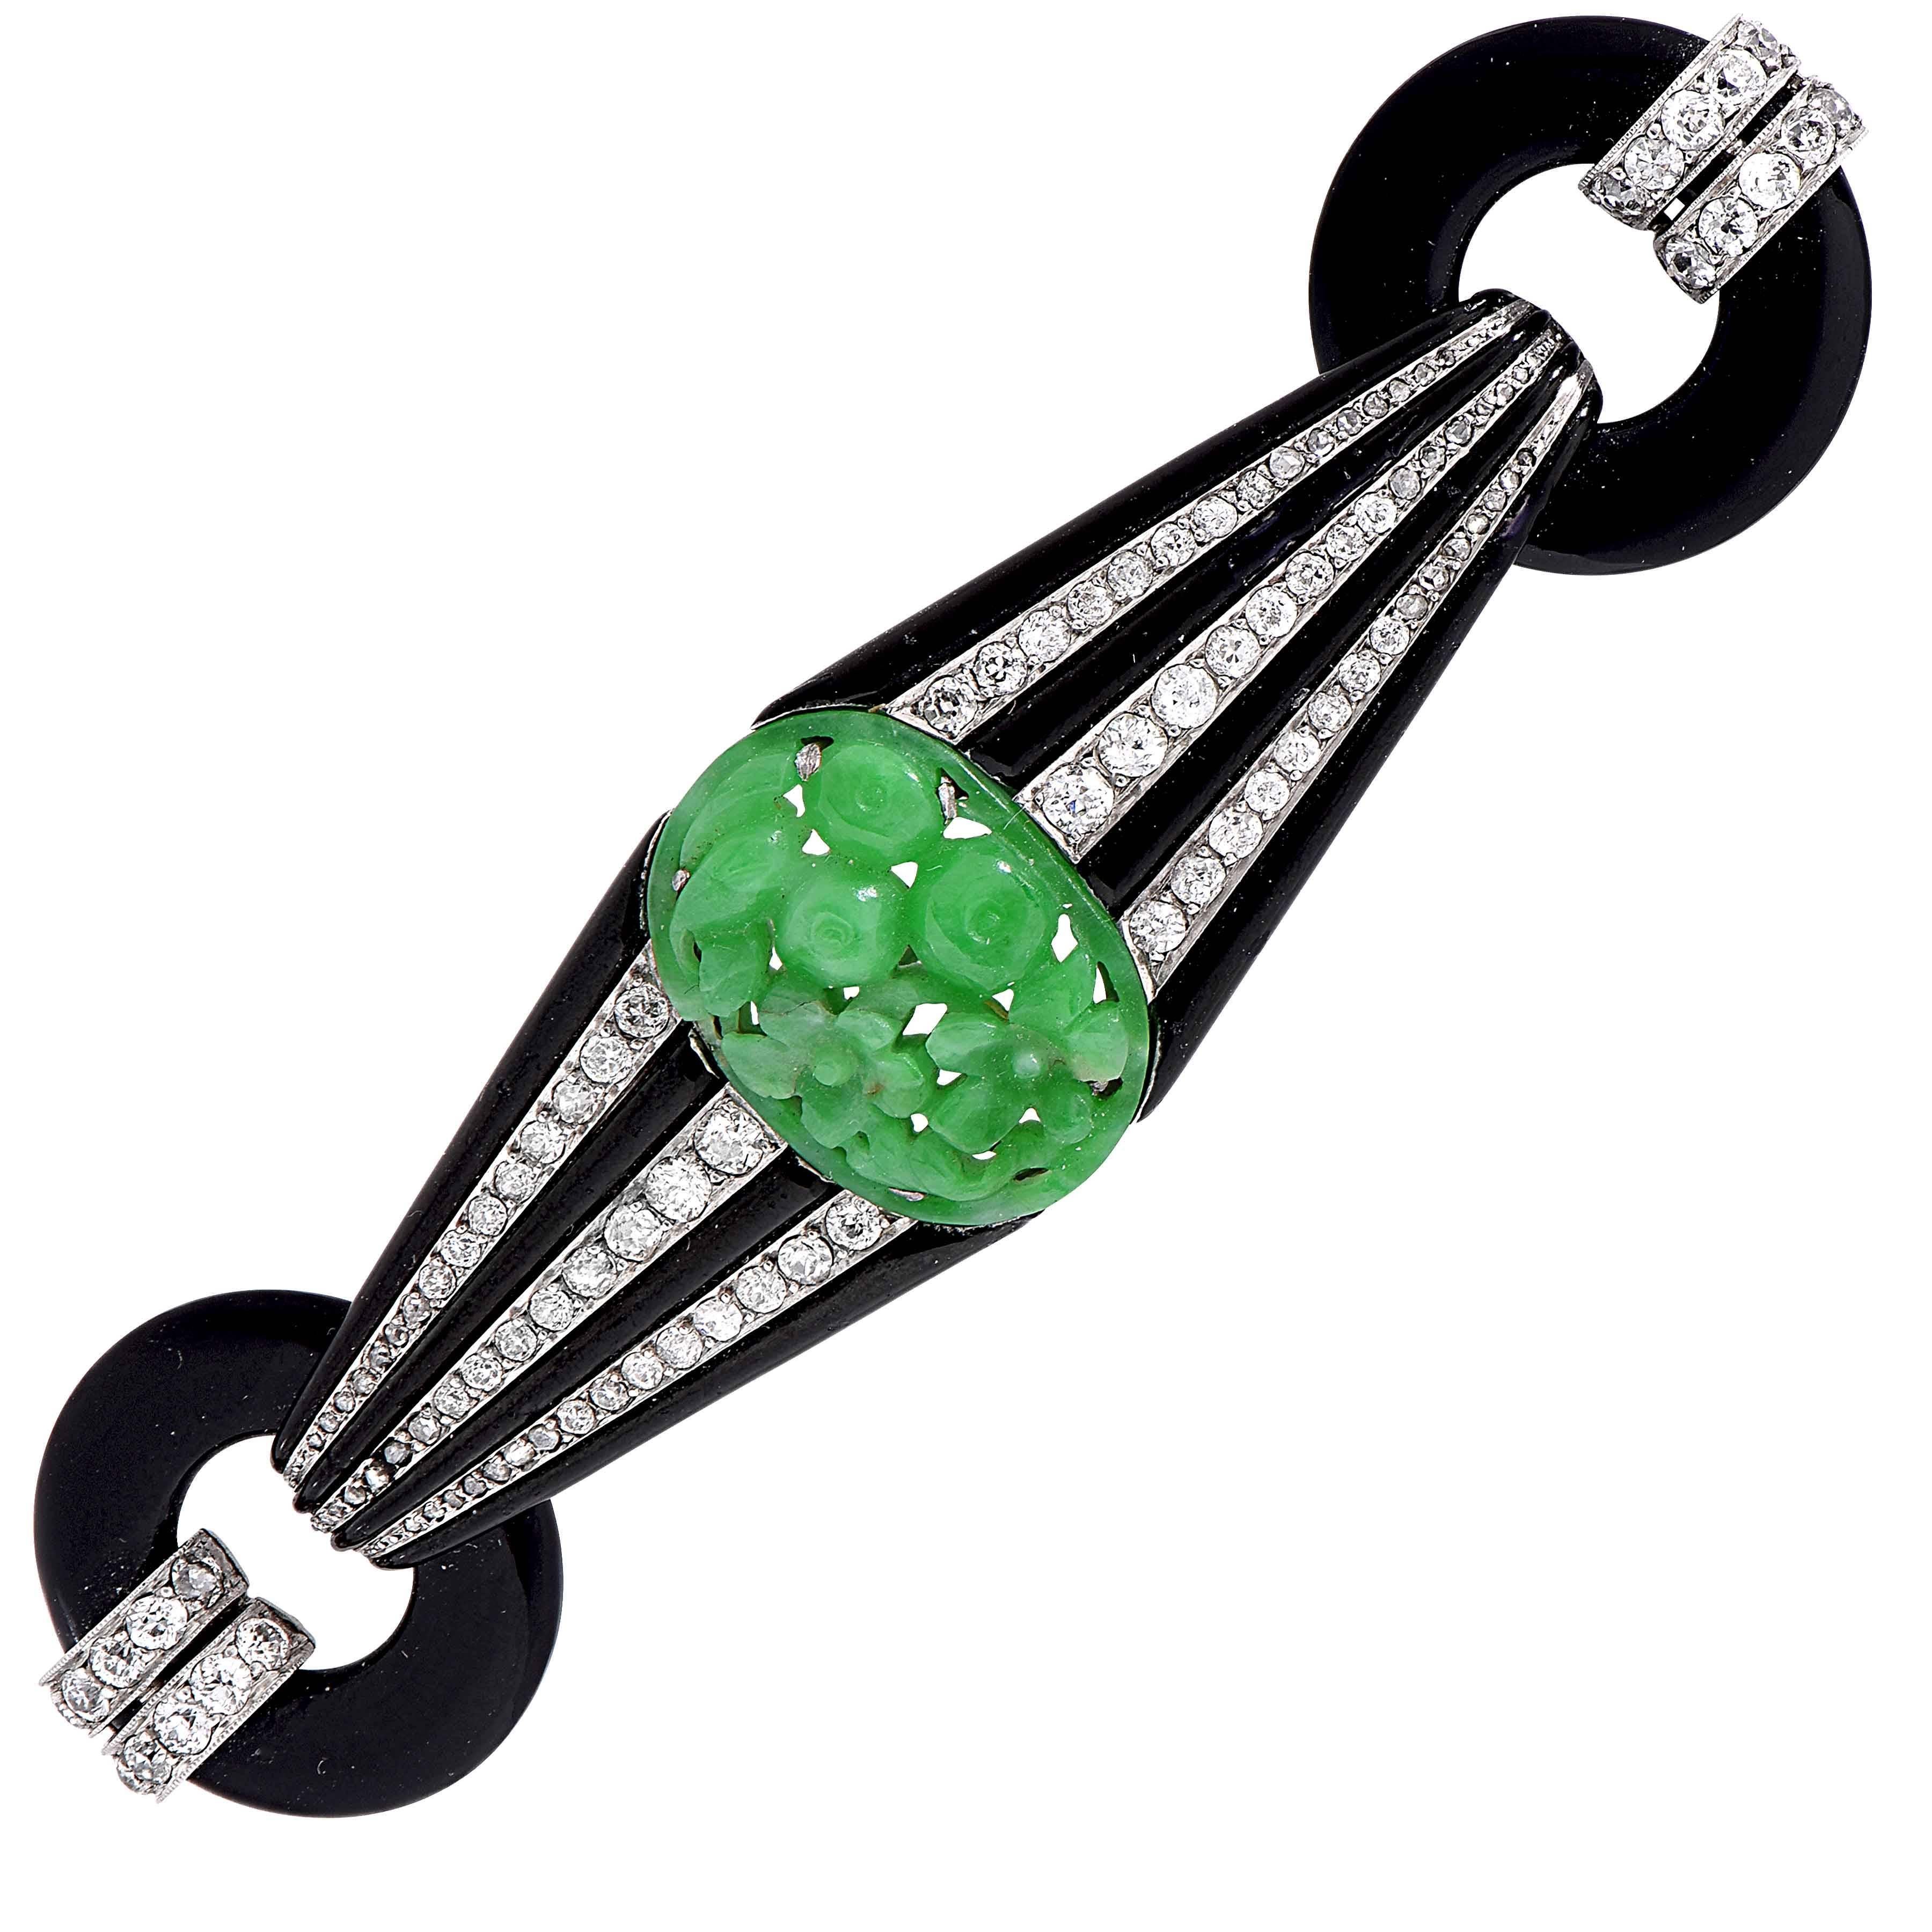 French Art deco brooch set with rose cut and old mine cut diamonds. The  center of the brooch is set with carved jade, with diamonds and enamel tapering down to the two round onyx ends.

Metal Type: Platinum
Metal Weight: 20.8 Grams